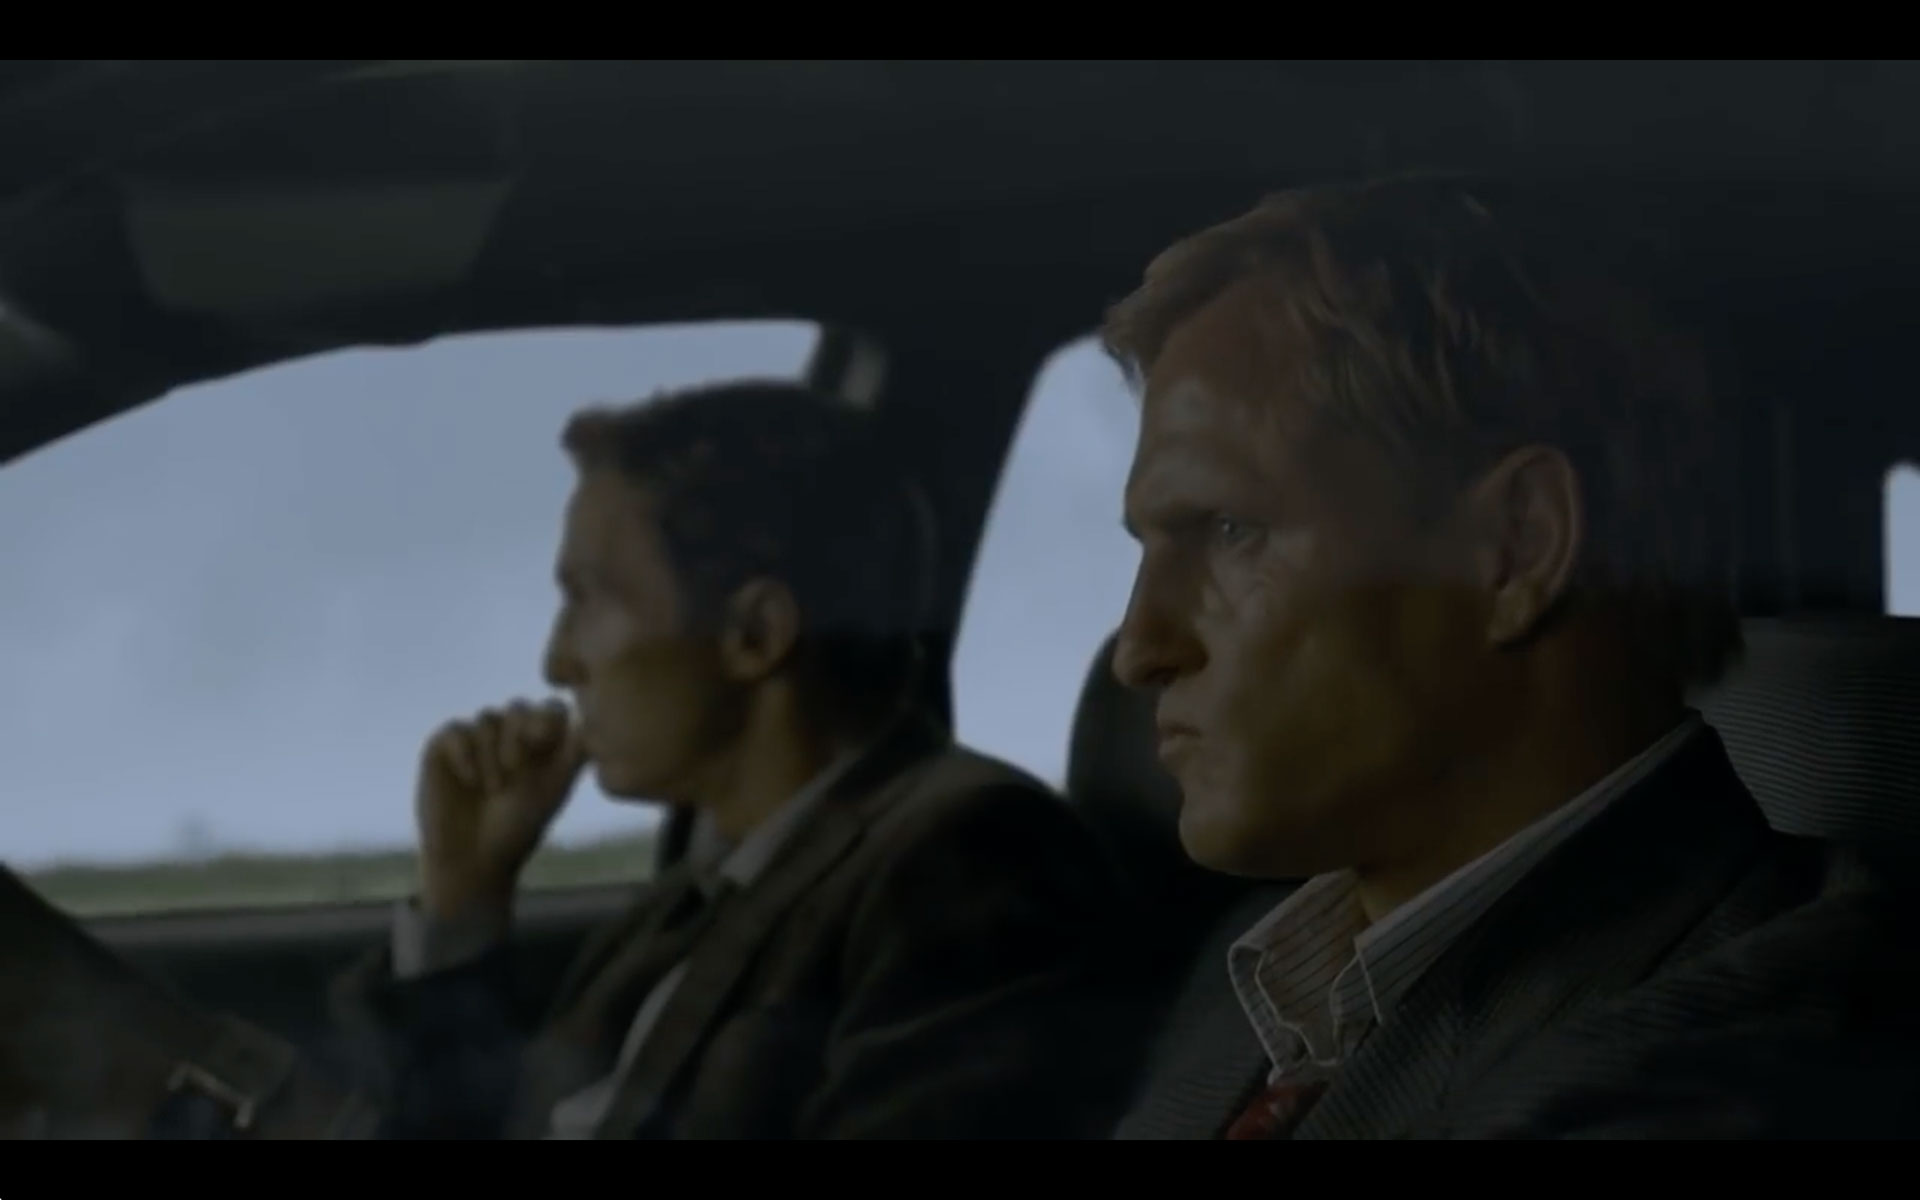 Rust cohle and marty фото 25